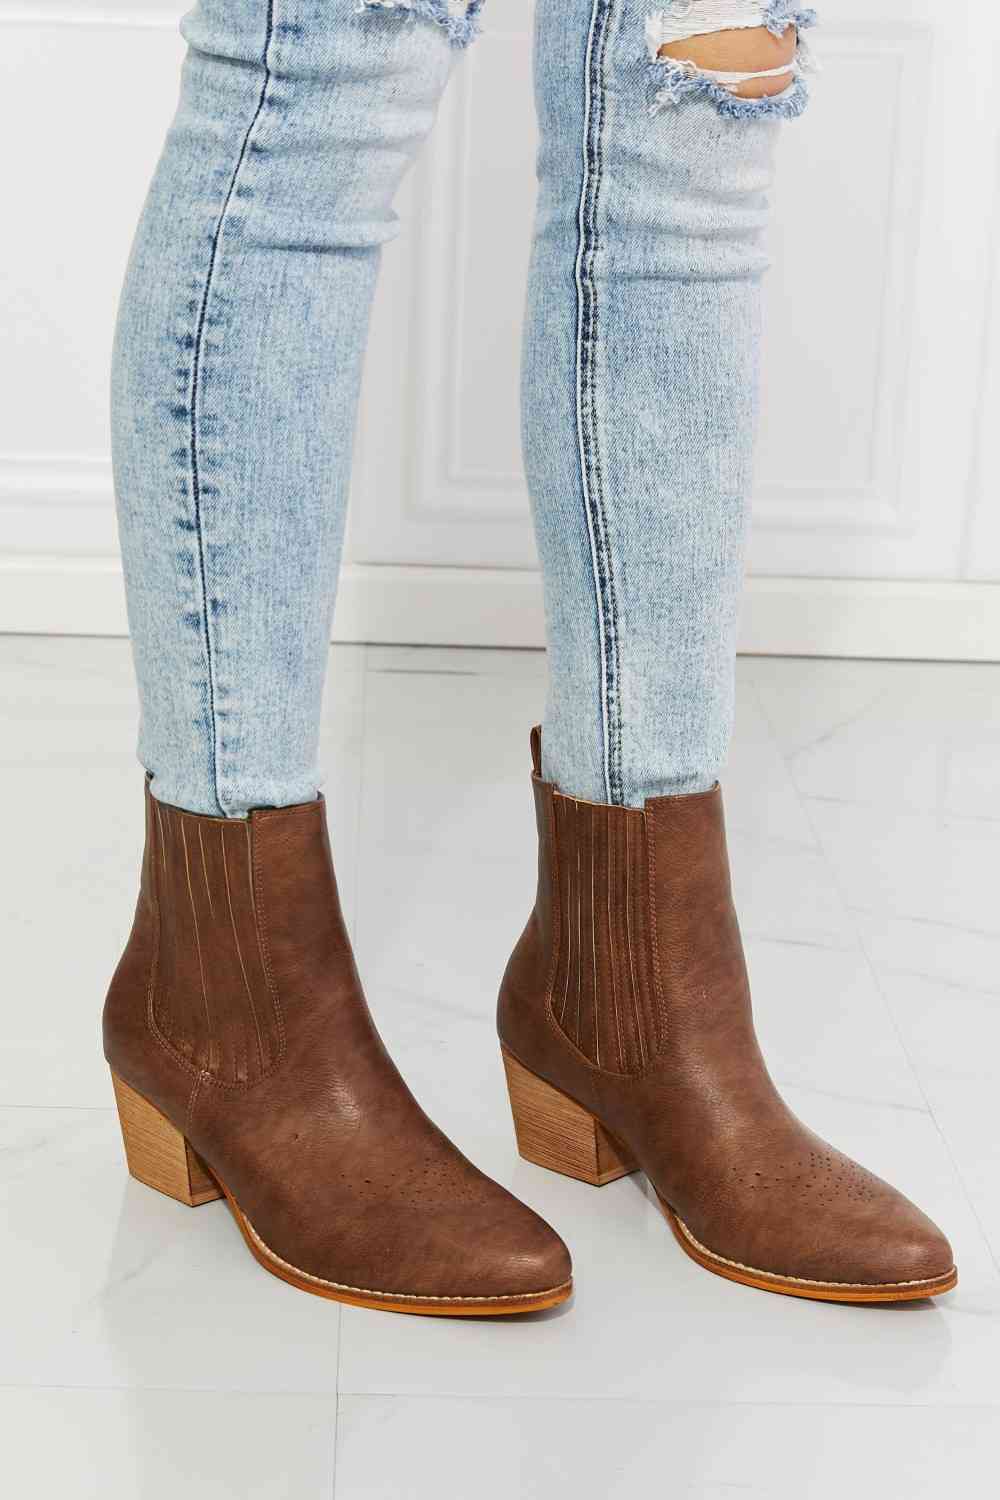 MMShoes Love the Journey Stacked Heel Chelsea Boot in Chestnut Chestnut